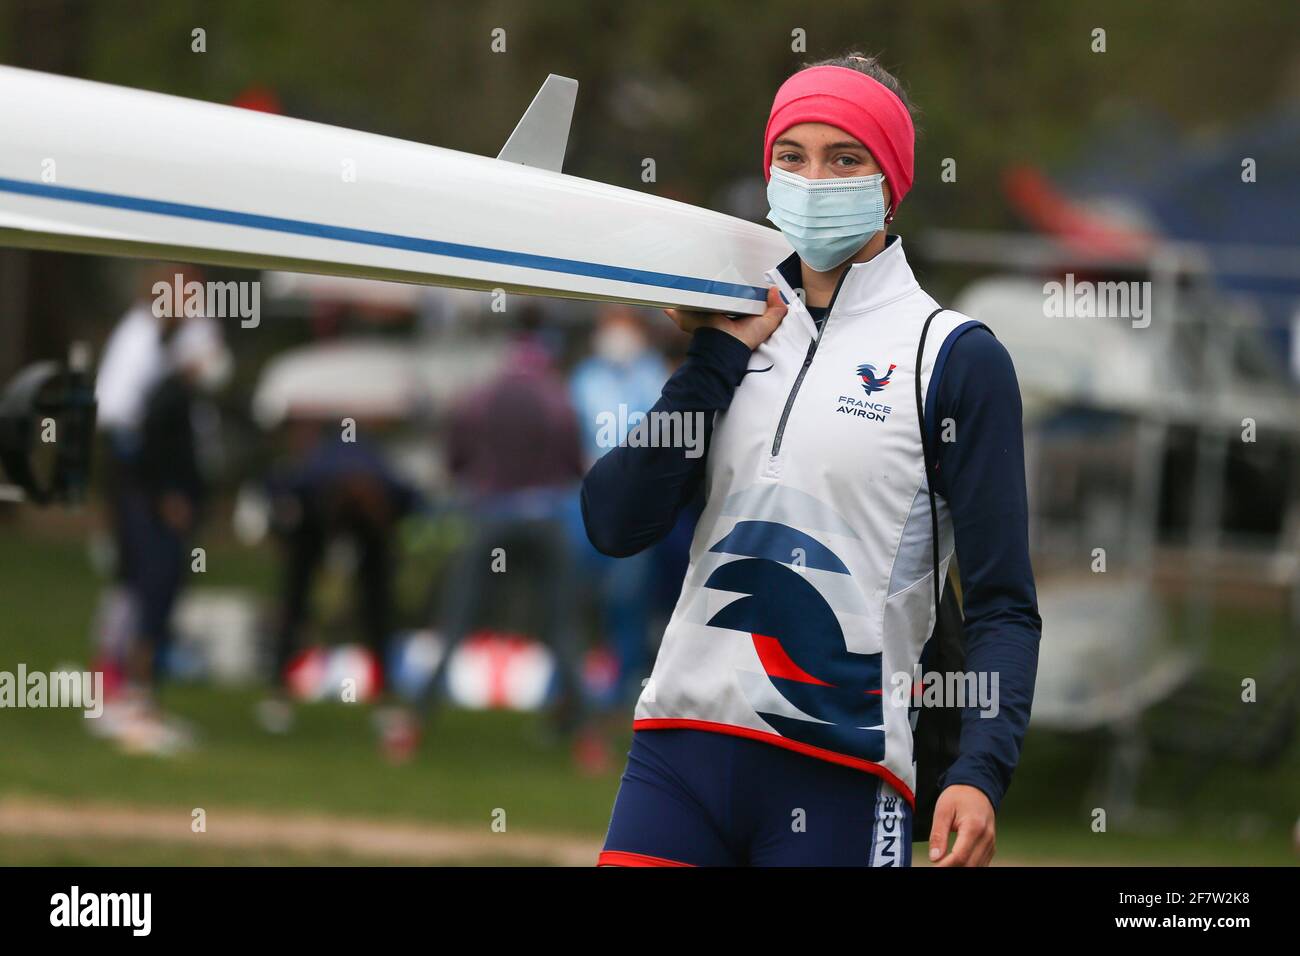 Varese, Italy. 10th Apr, 2021. Claire BOVE of France is training ahead of  her Lightweight Single Scull race on Day 2 at the European Rowing  Championships in Lake Varese on April 10th